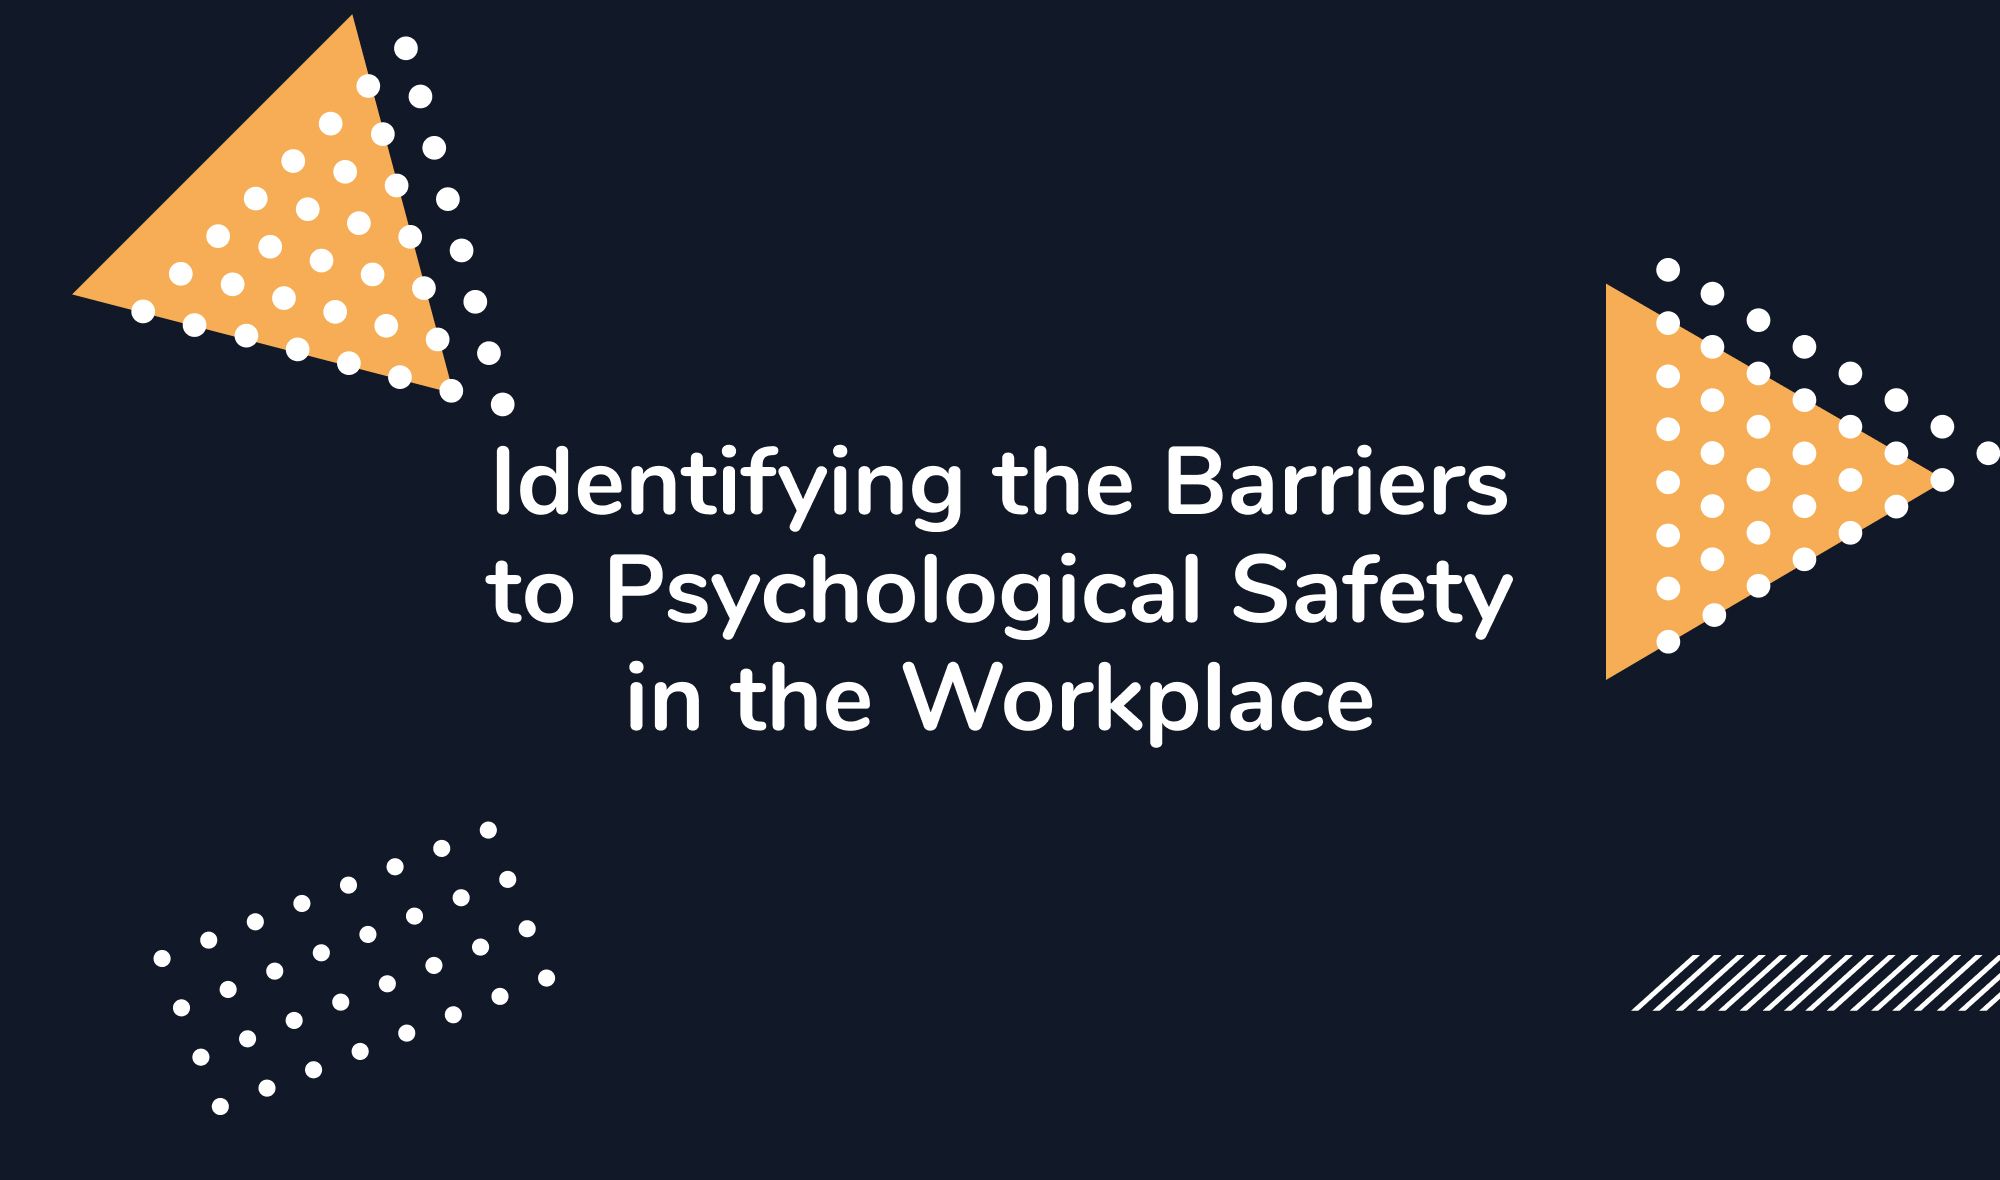 Identifying the Barriers to Psychological Safety in the Workplace